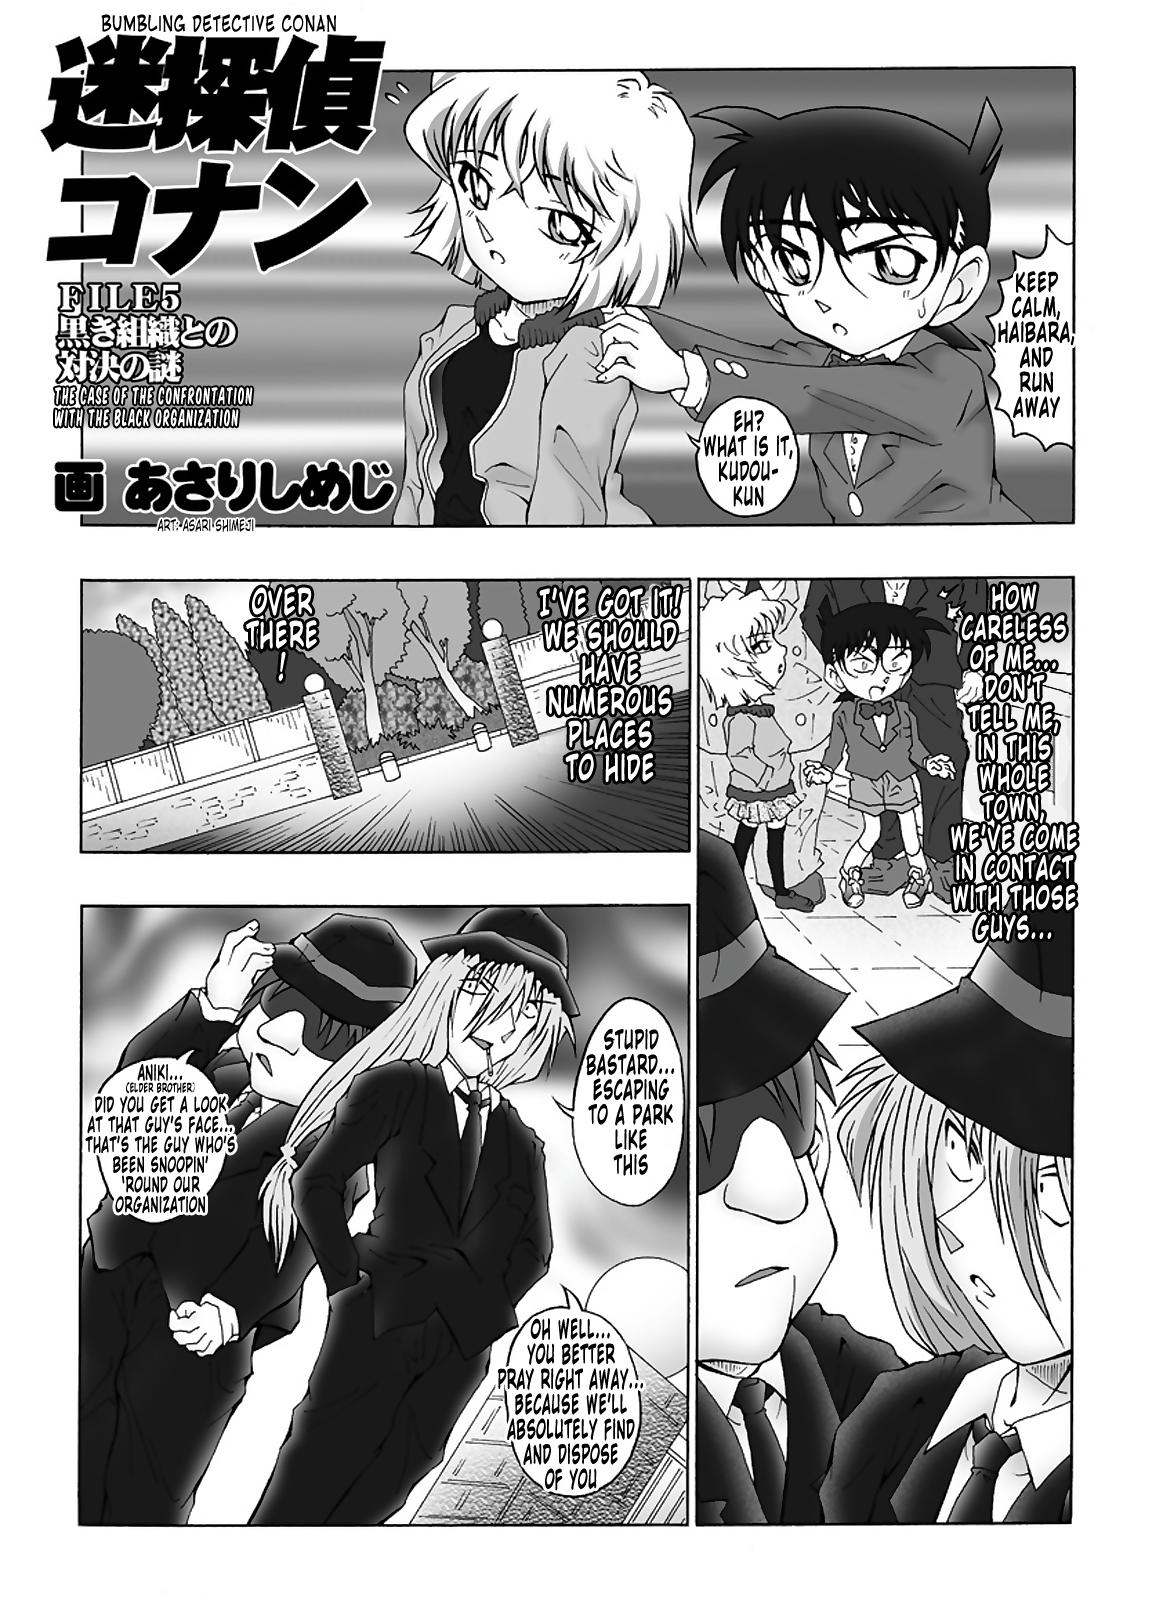 Amatuer Bumbling Detective Conan - File 5: The Case of The Confrontation with The Black Organiztion - Detective conan Homo - Page 4